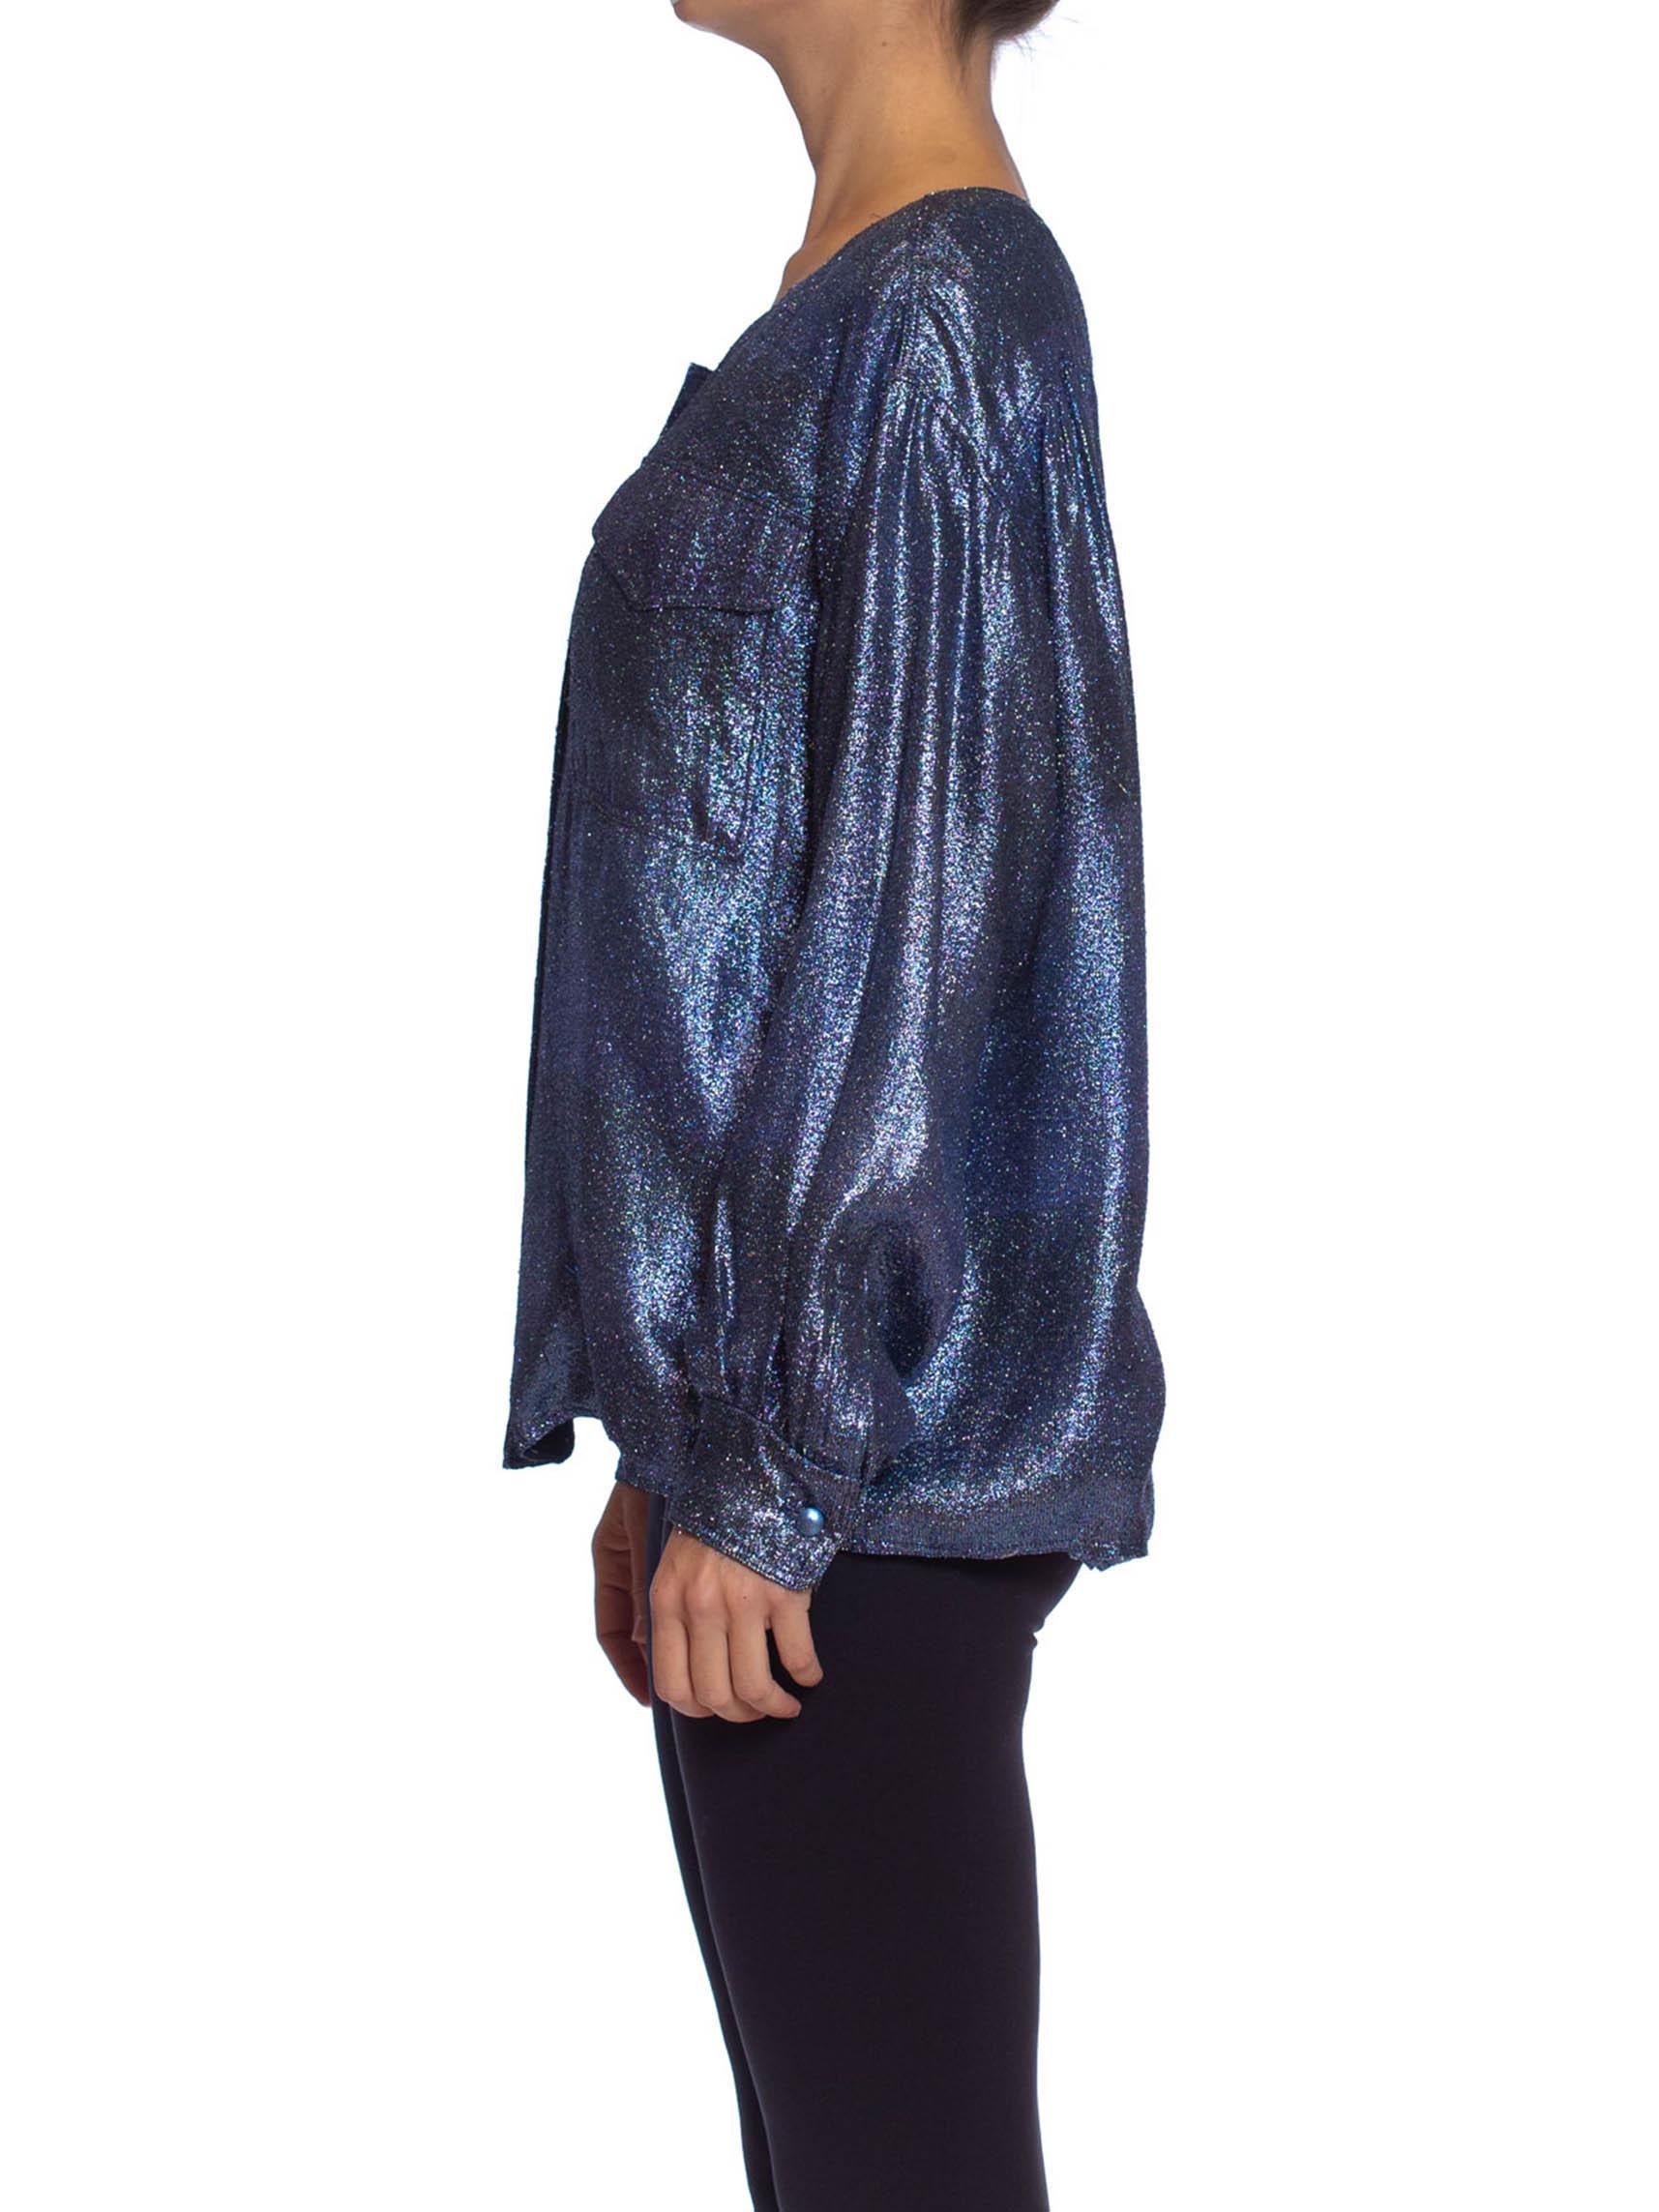 1980S PER SPOOK COUTURE Teal Metallic Silk Lurex Chiffon Military Styled Blouse For Sale 2